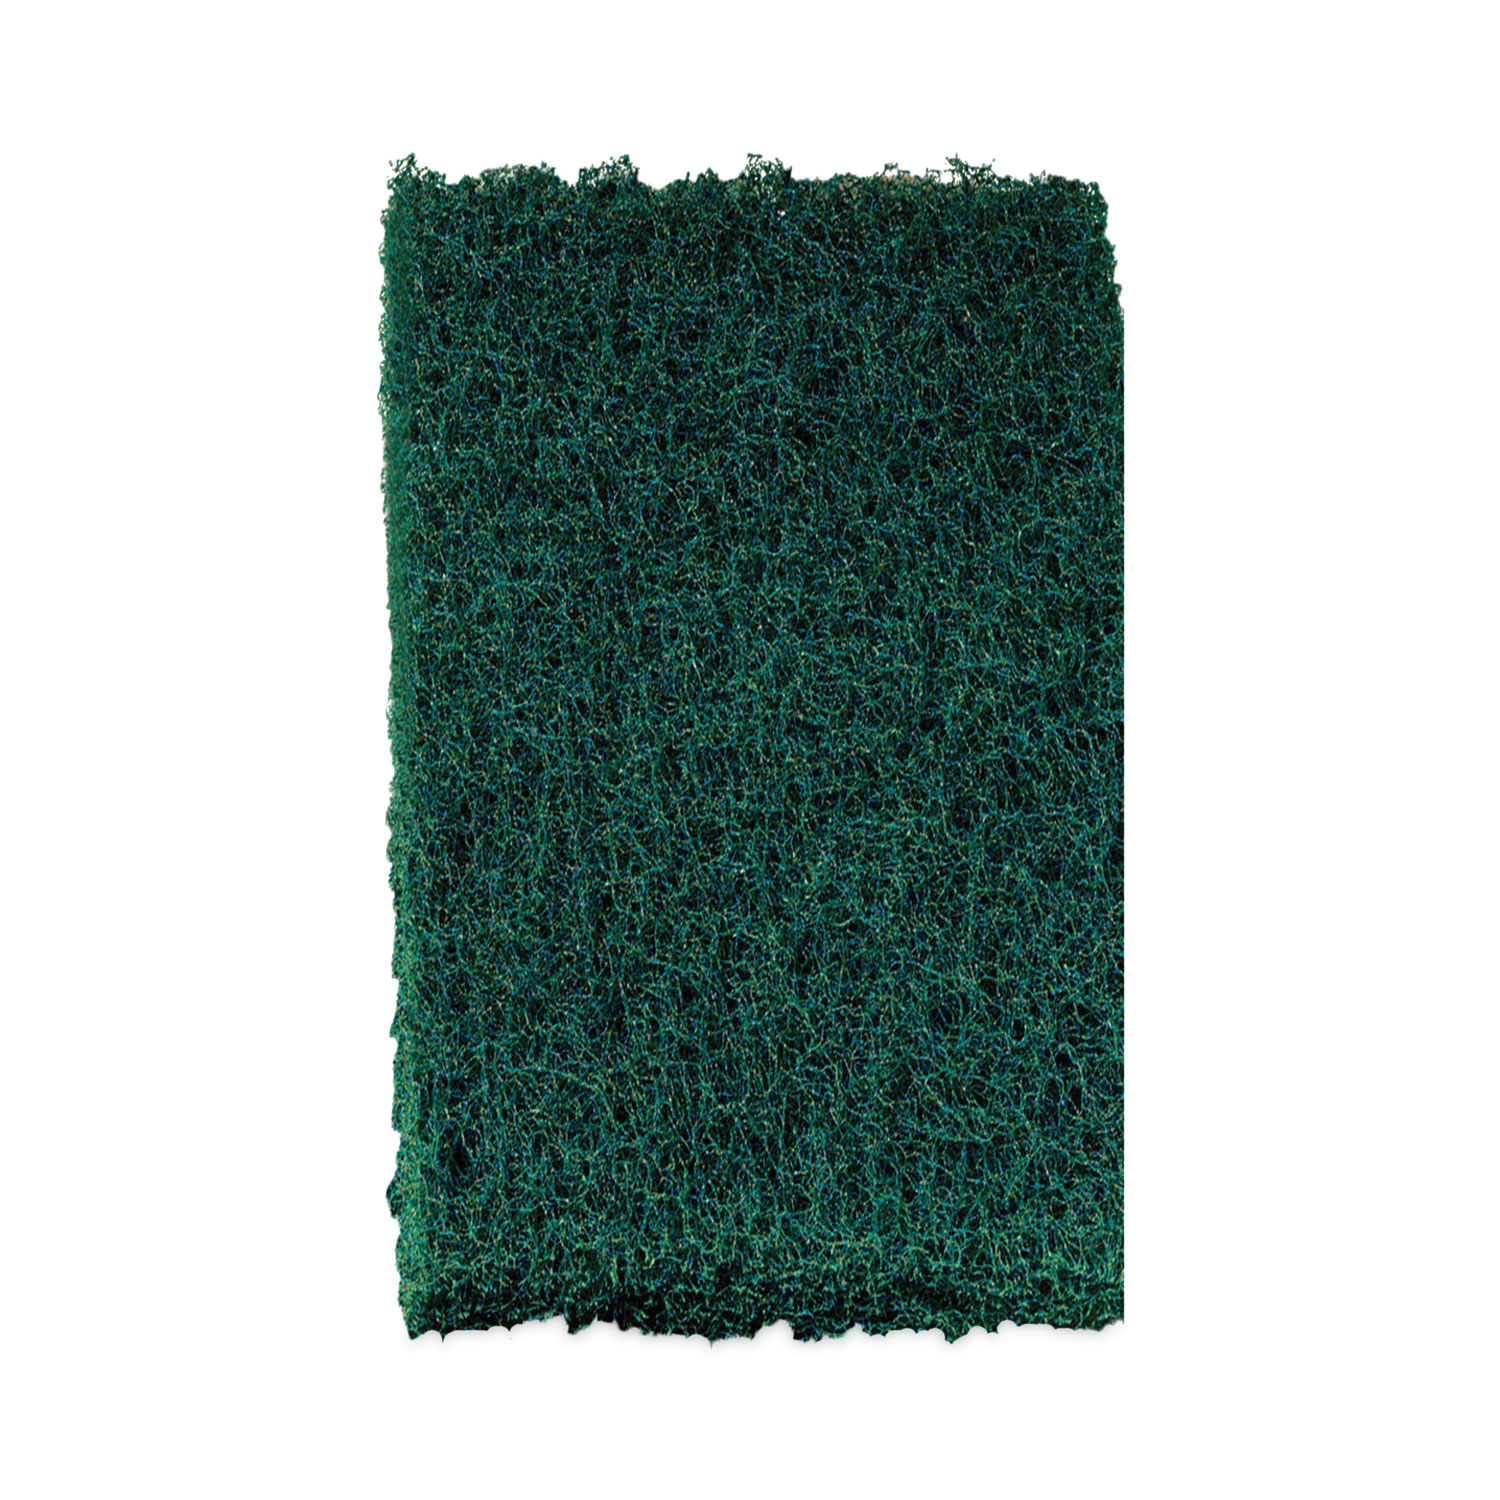 Lavex 9 x 6 x 3/8 Extra Heavy-Duty Green Scouring Pad - 10/Pack